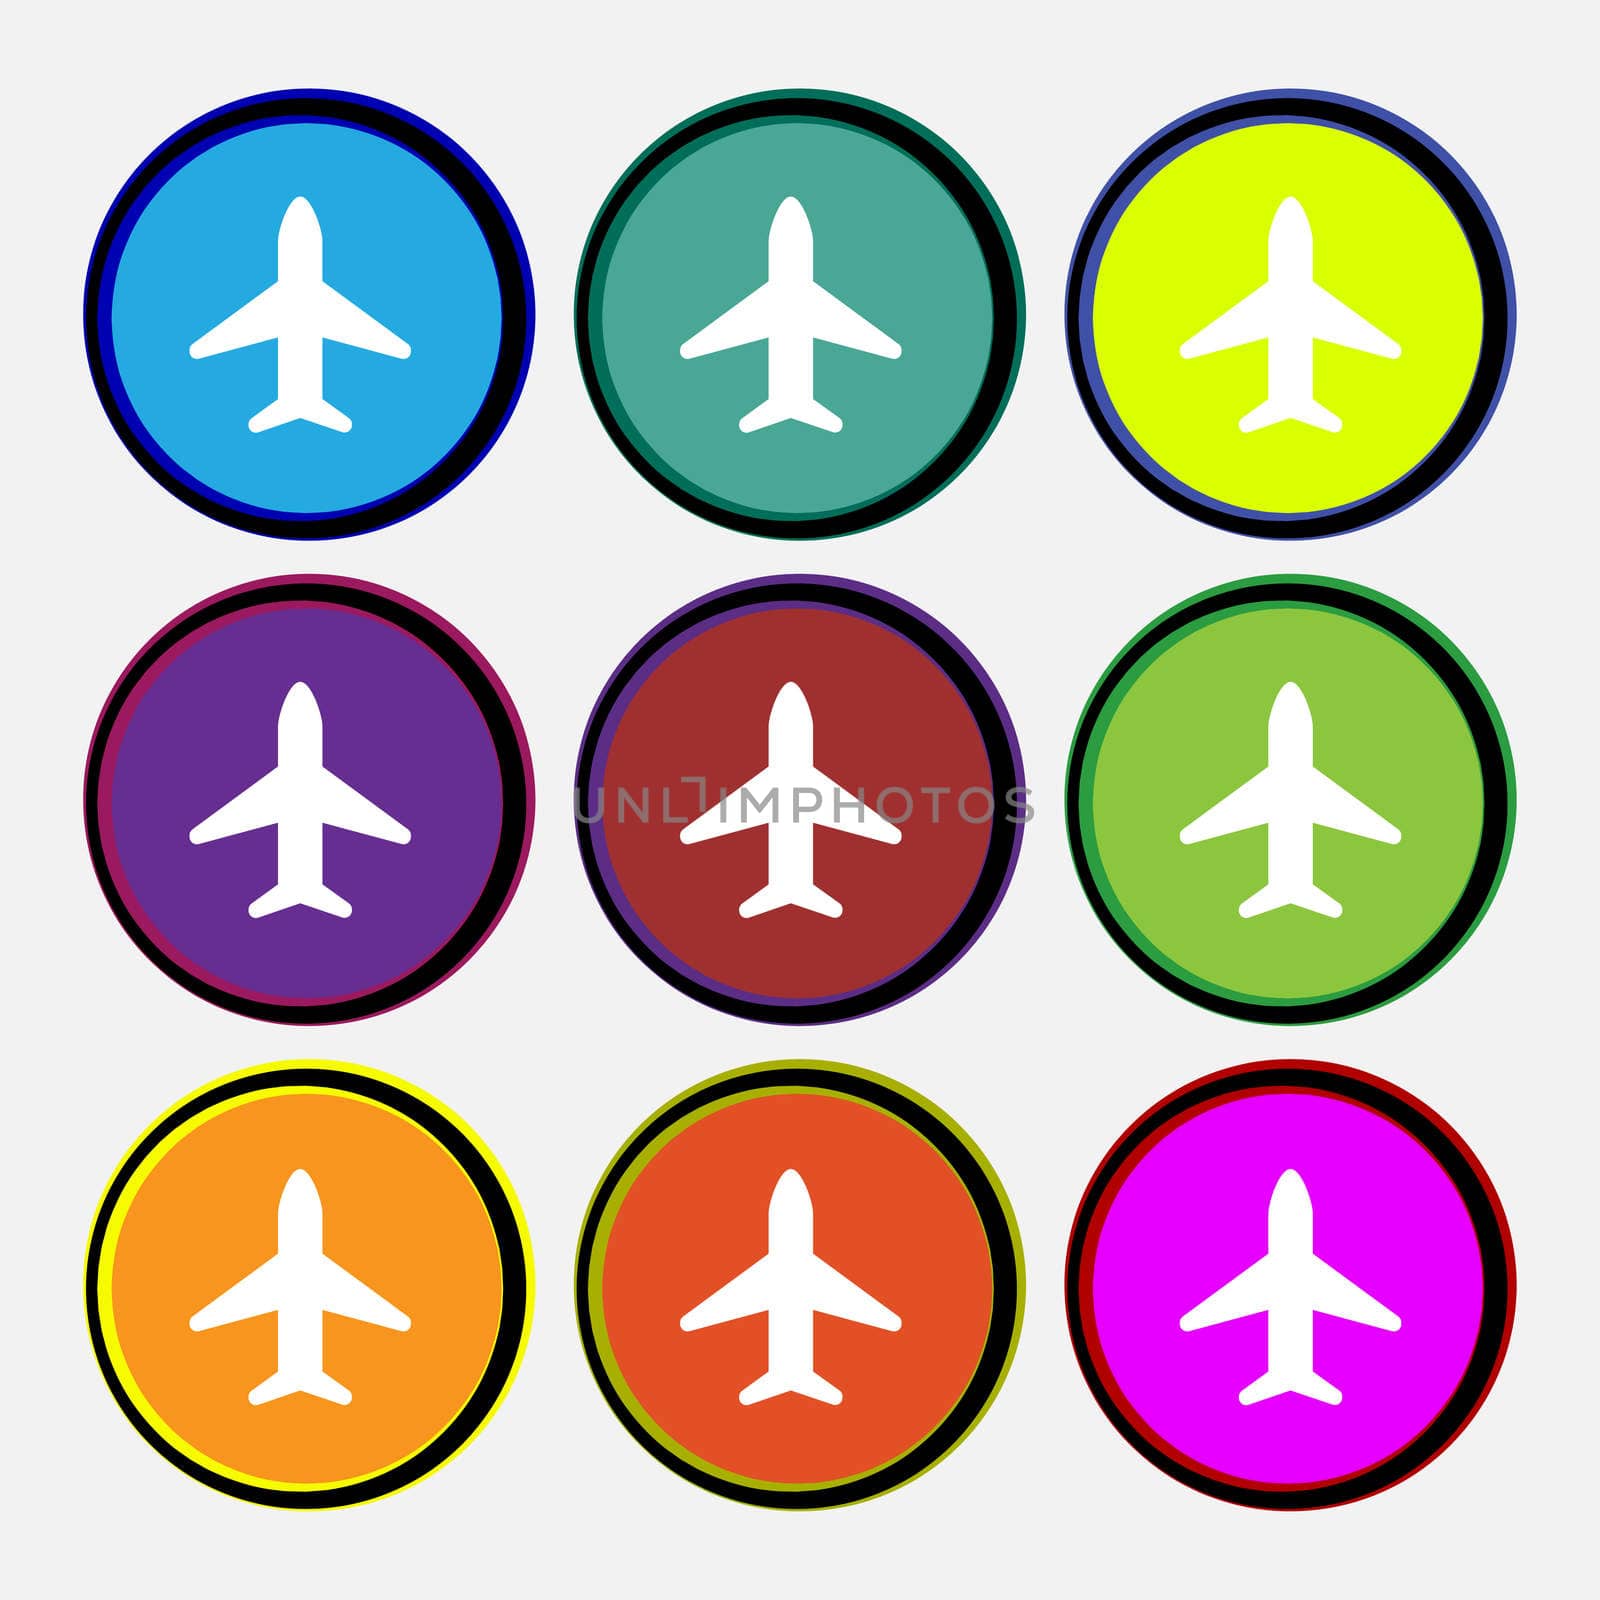 Airplane, Plane, Travel, Flight icon sign. Nine multi-colored round buttons. illustration